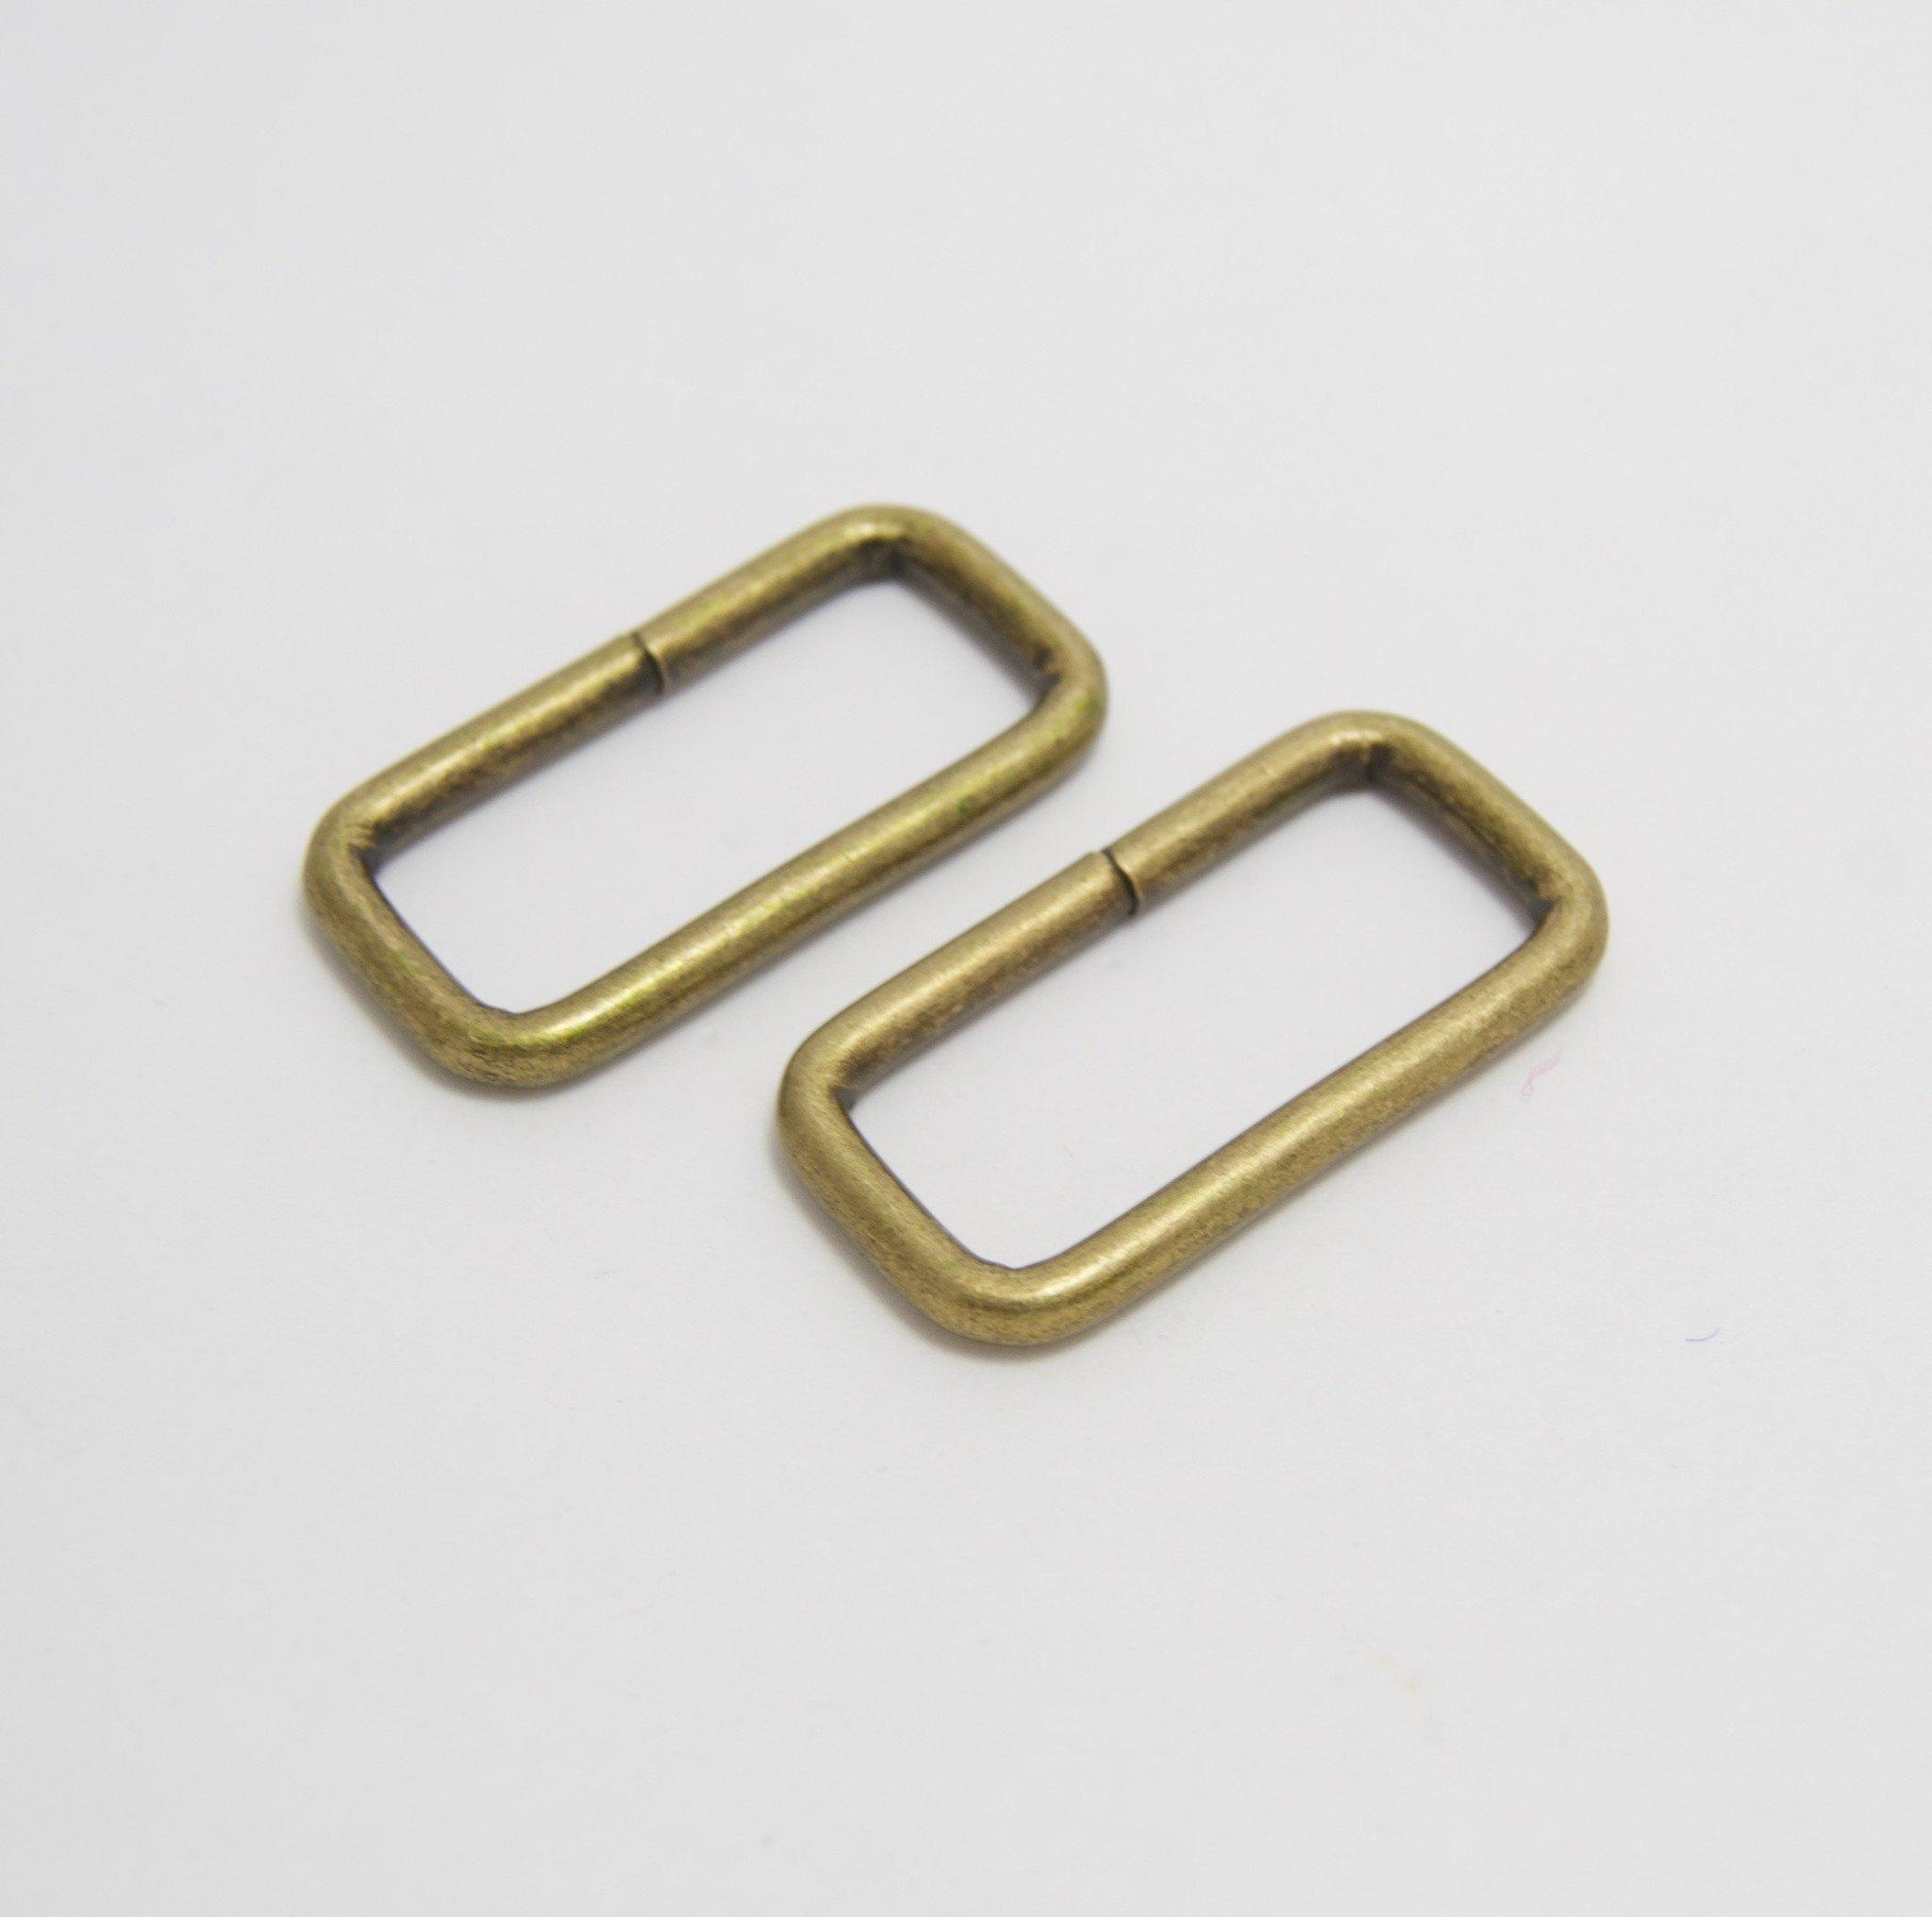 1 1/4" (32mm) wire form rectangle rings in antique brass